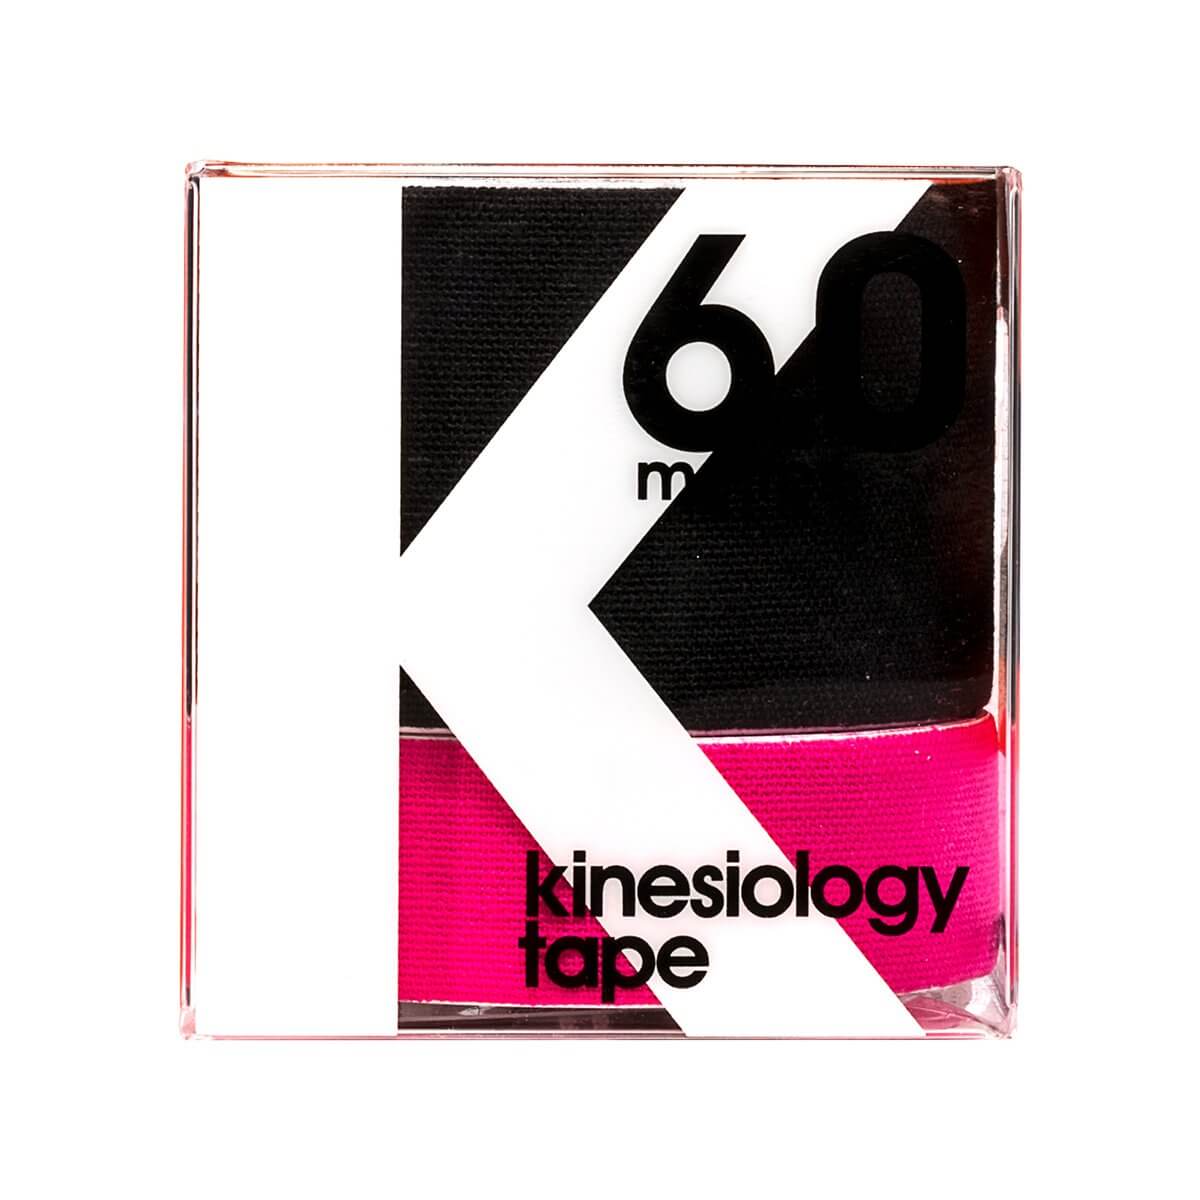 K6.0 kinesiology tape - Double roll 2 inches x 20 ft.